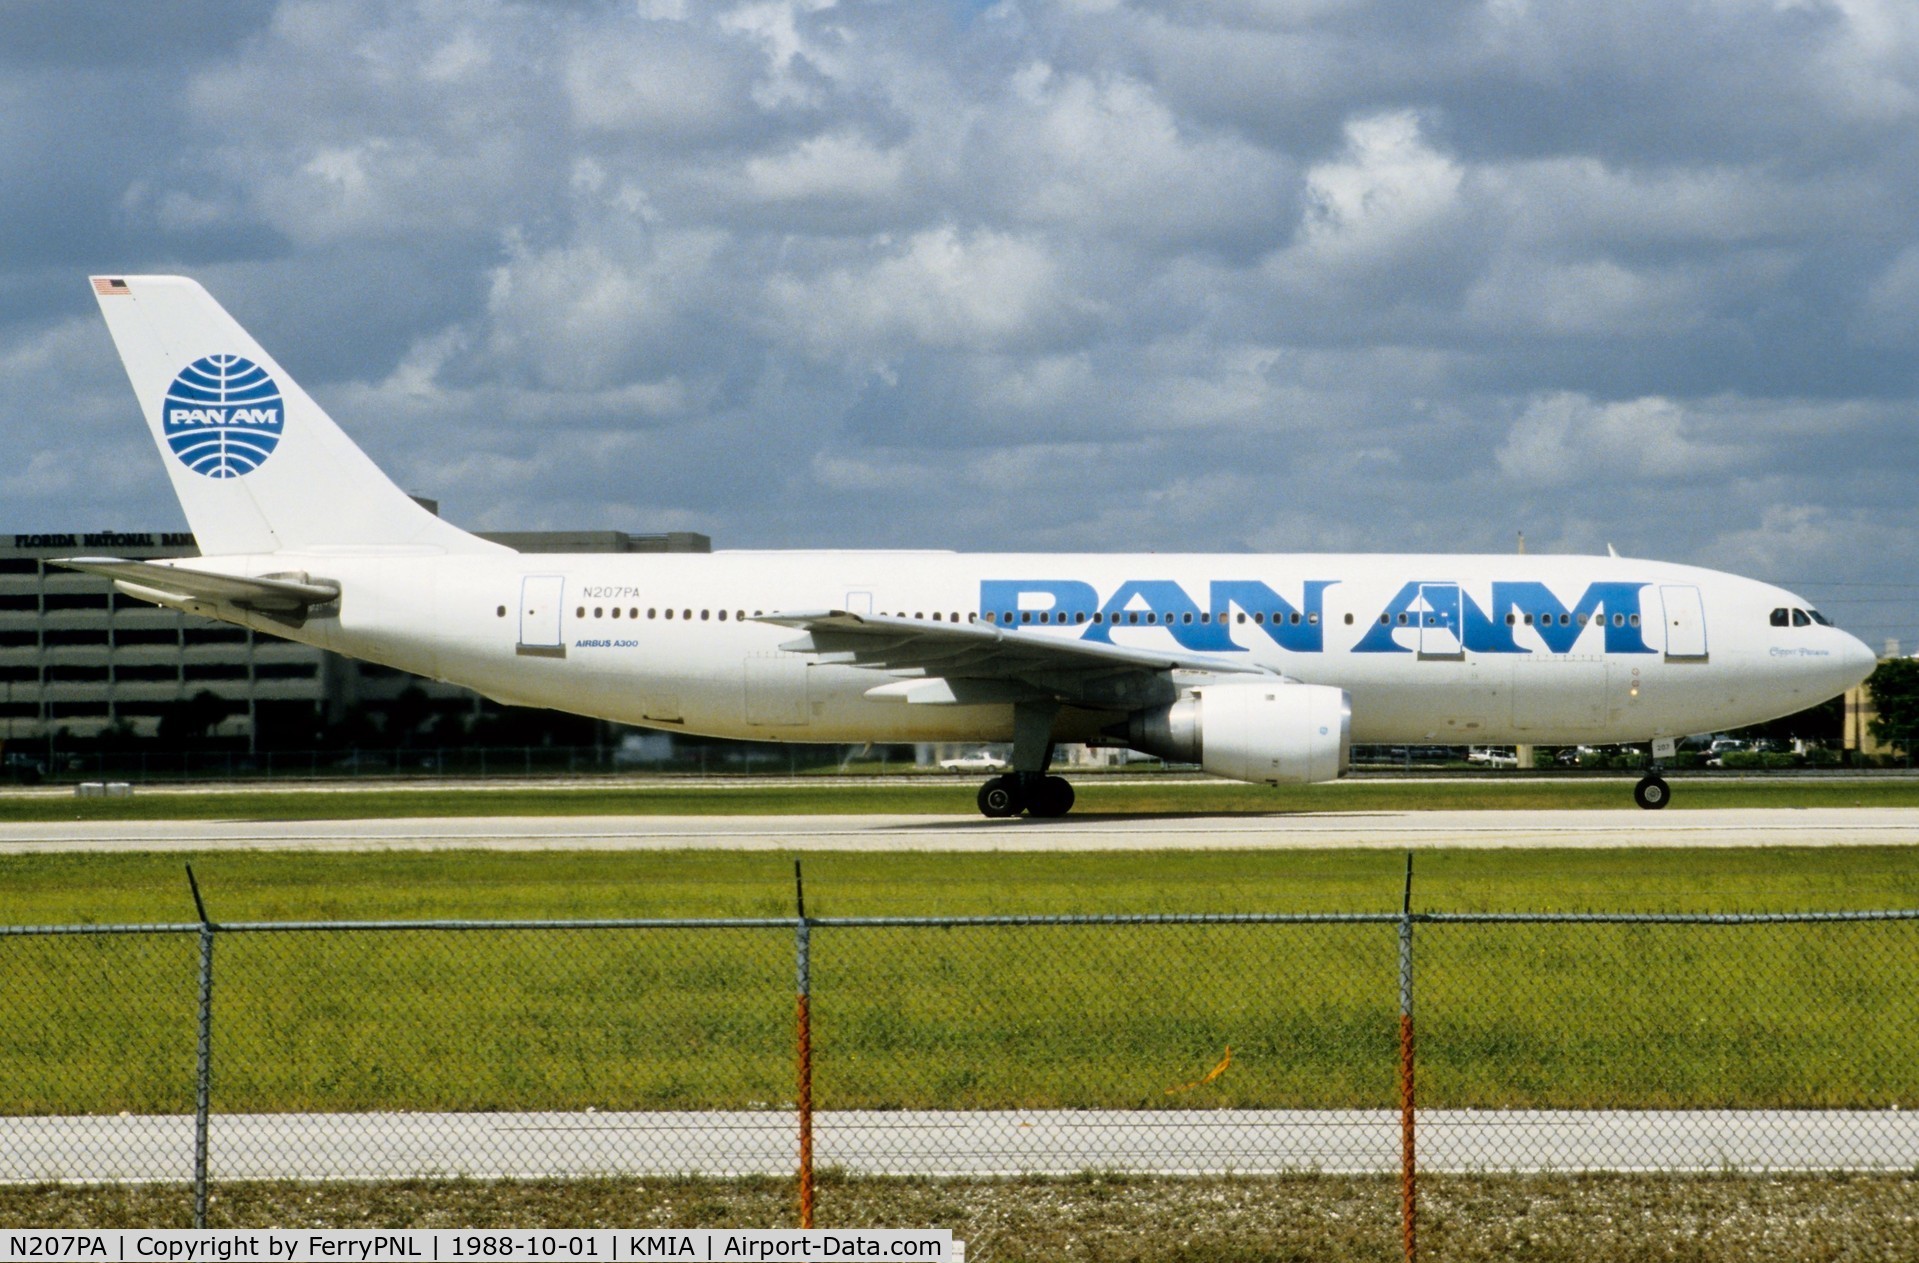 N207PA, 1983 Airbus A300B4-203F C/N 236, PanAm A300 for departure